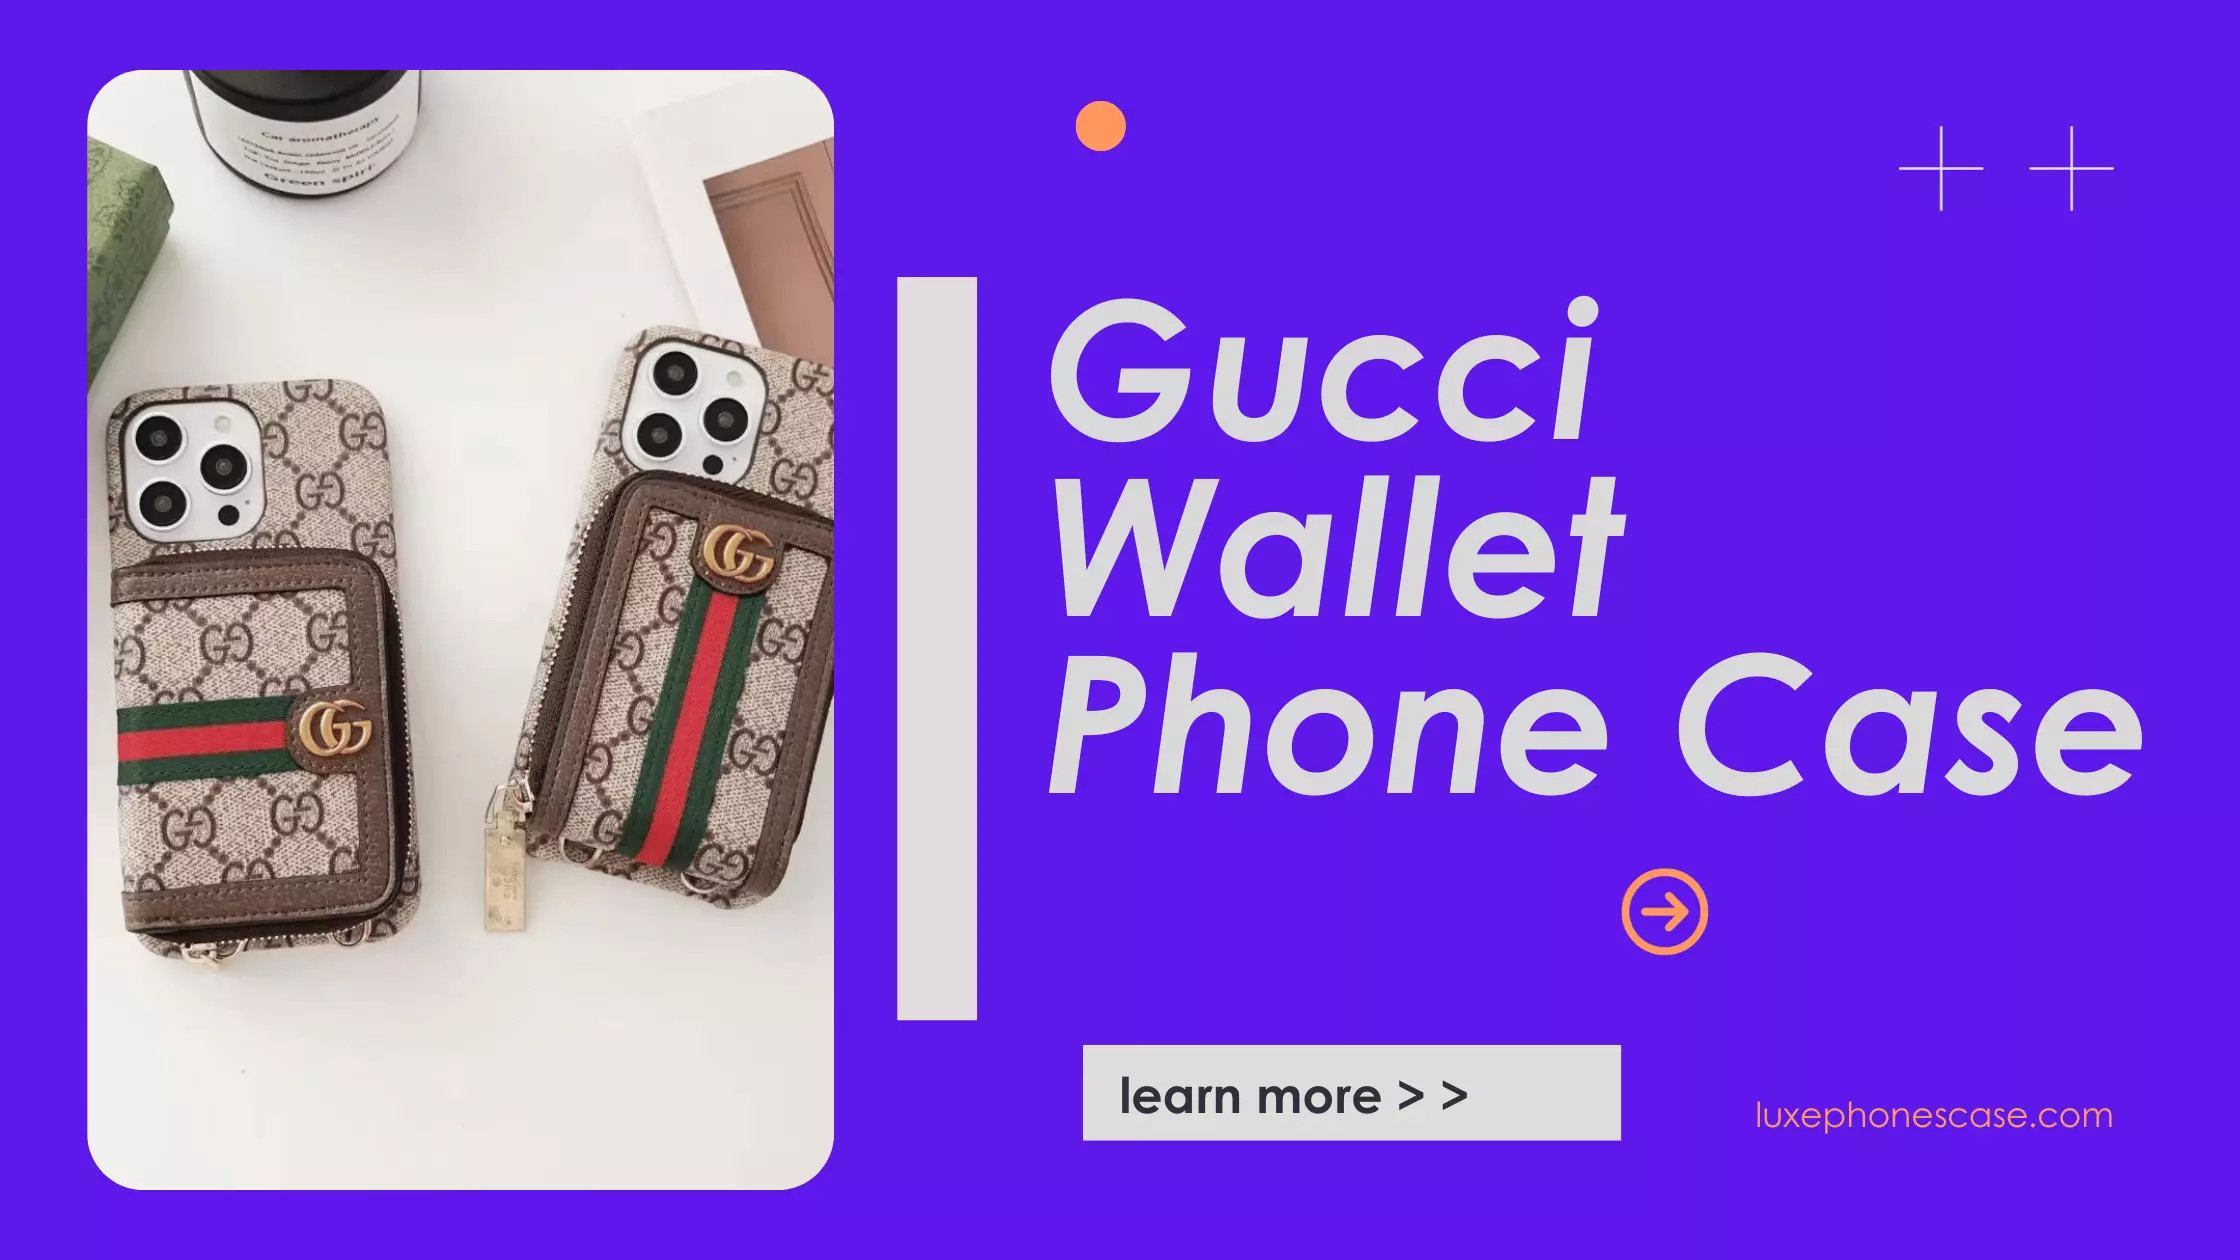 Discover the best gucci wallet phone case ever